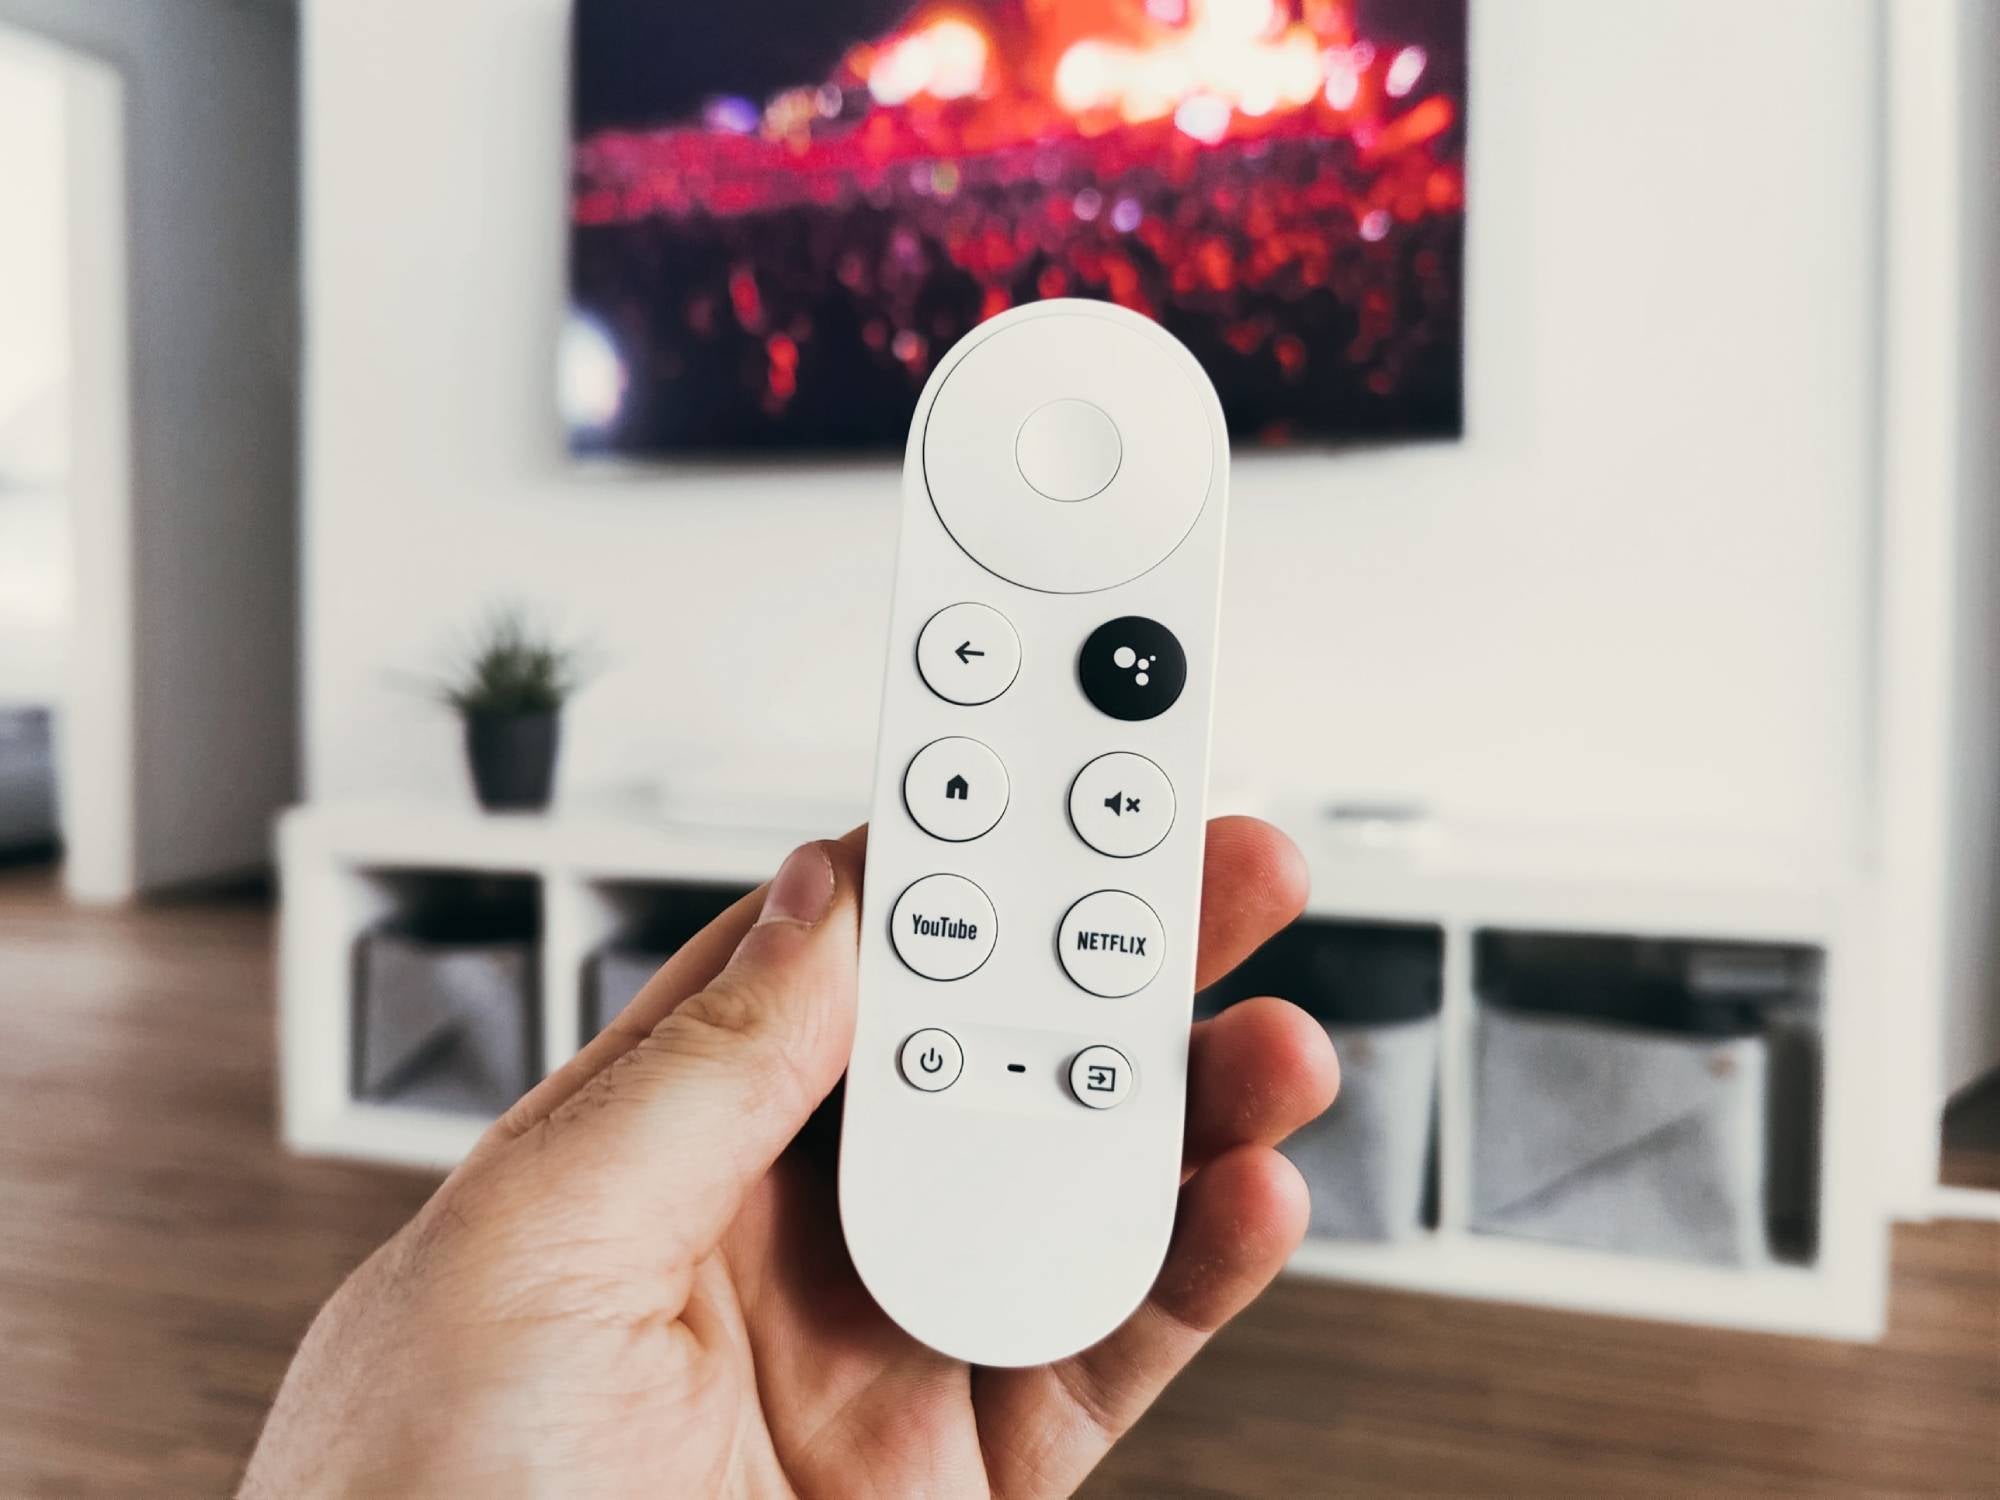 Help! My Sony TV remote control doesn't work